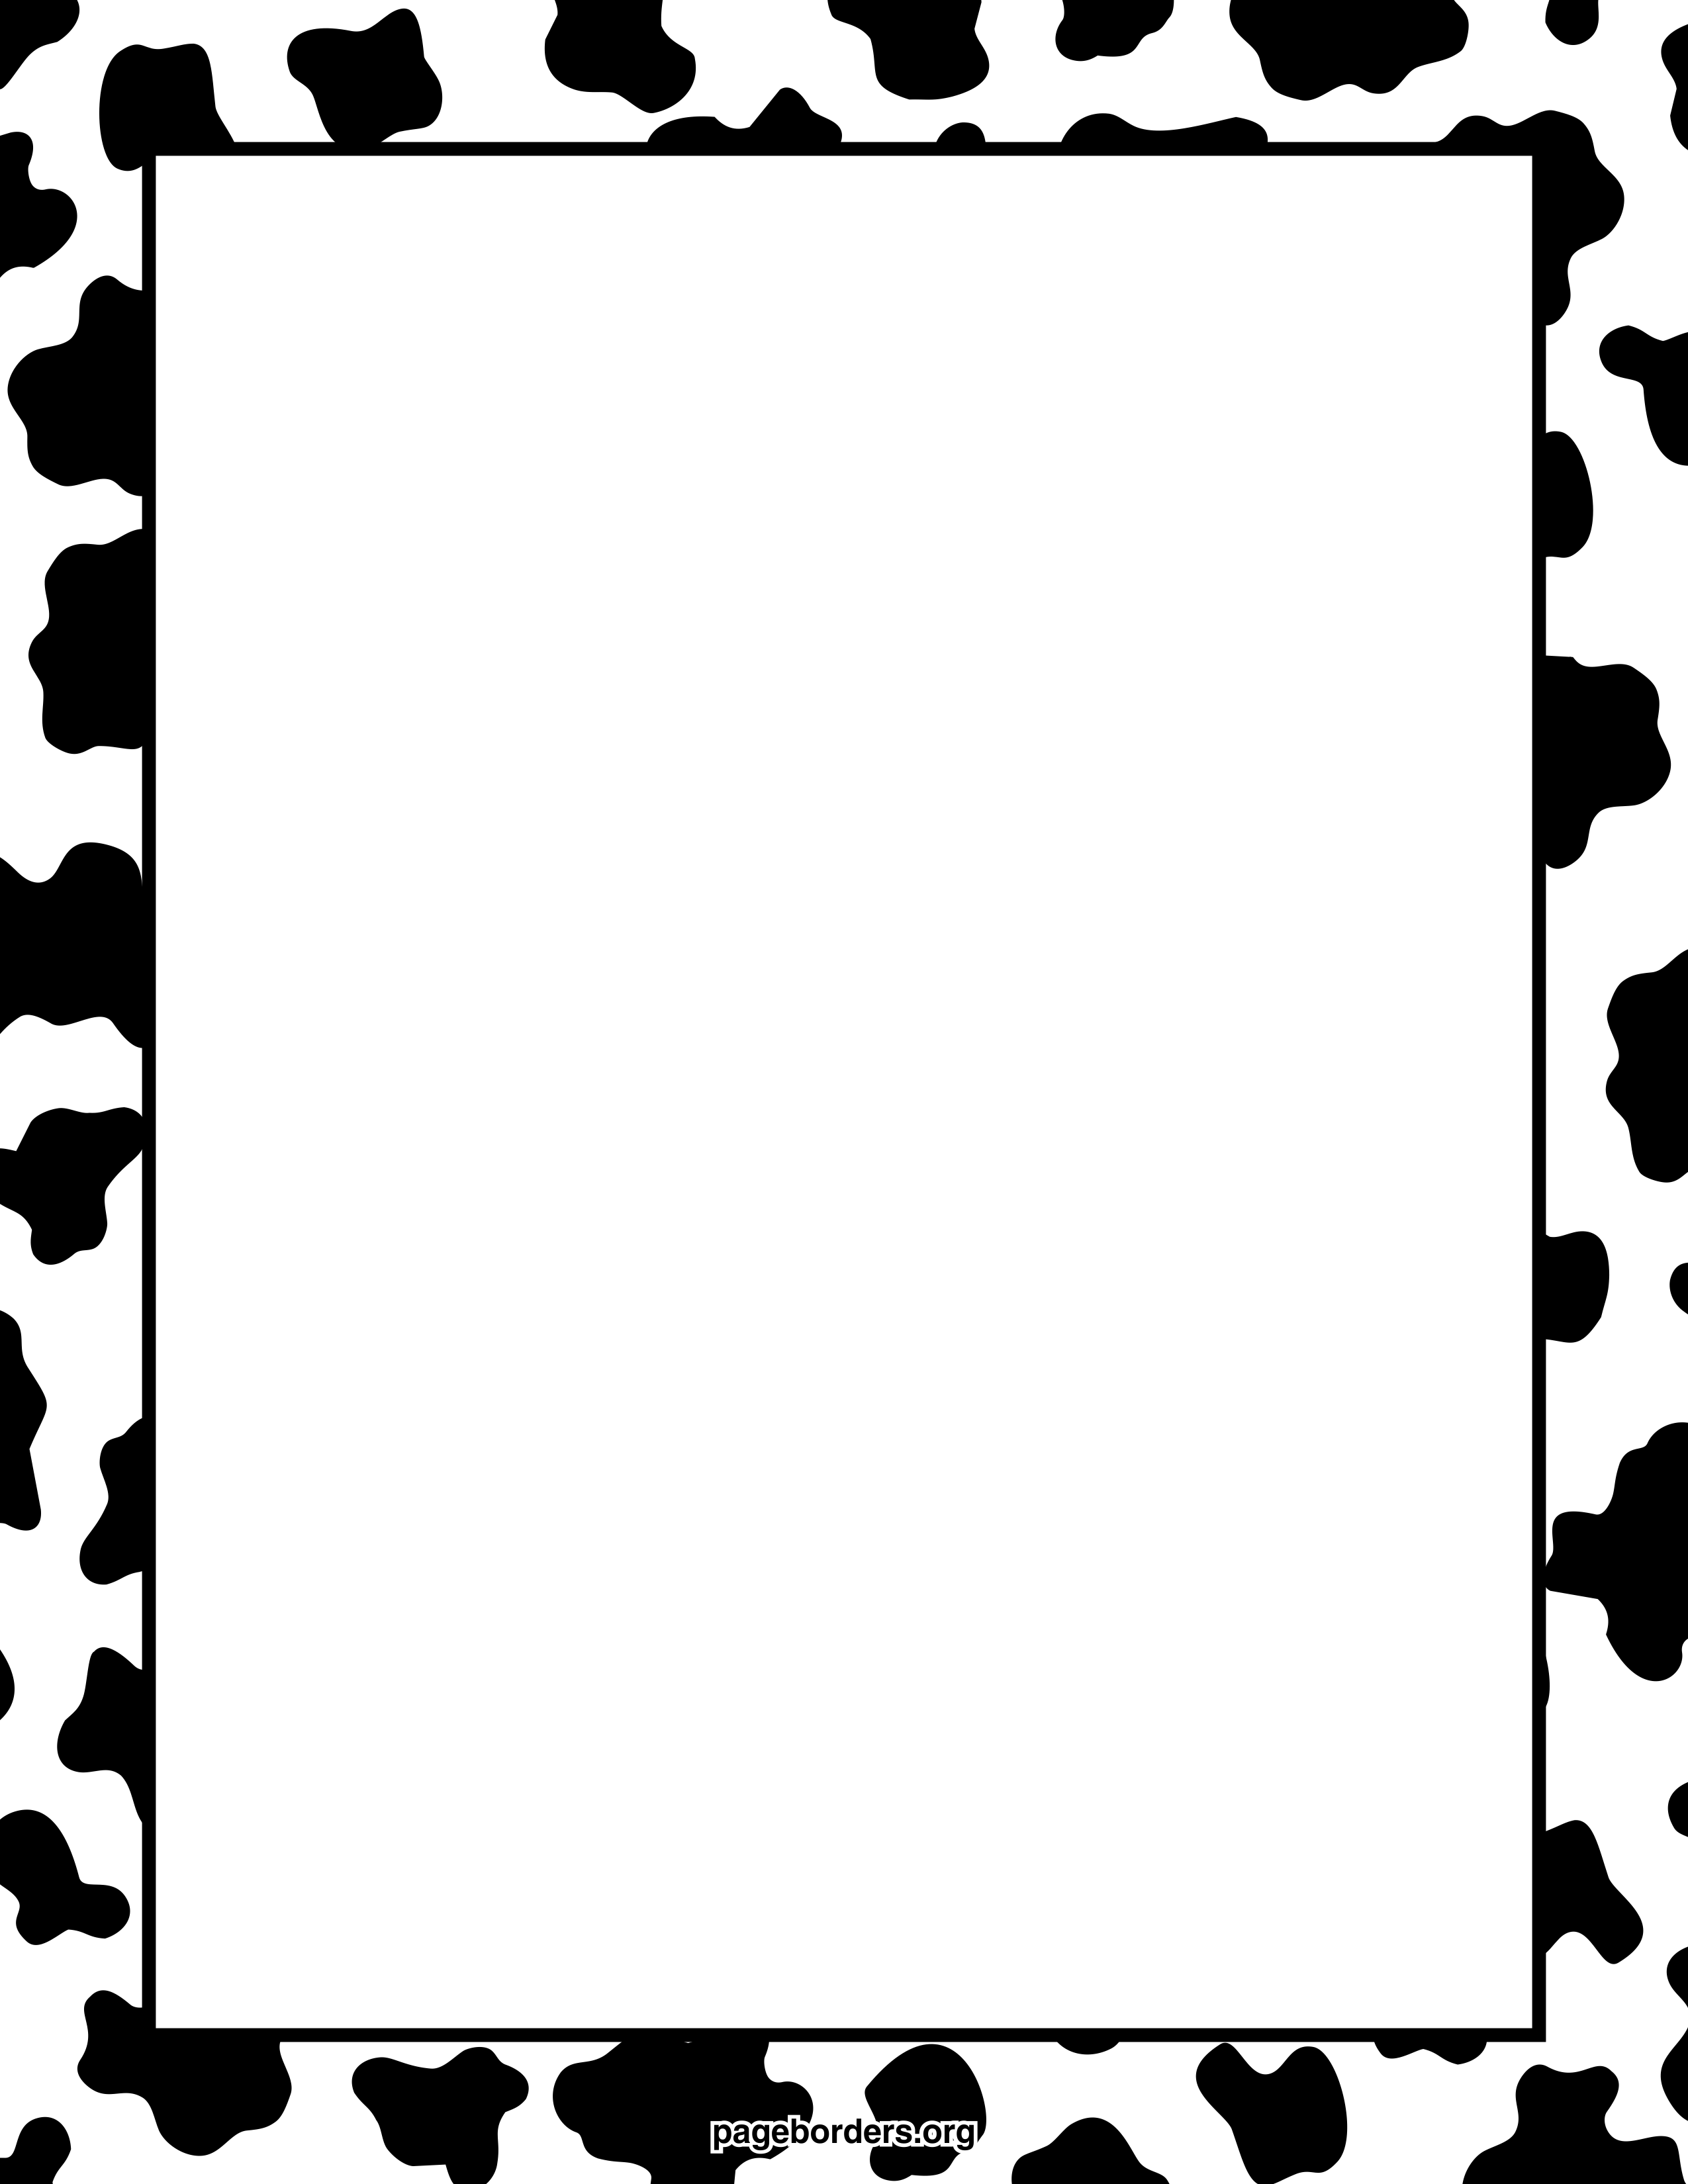 cow clipart simple - photo #21